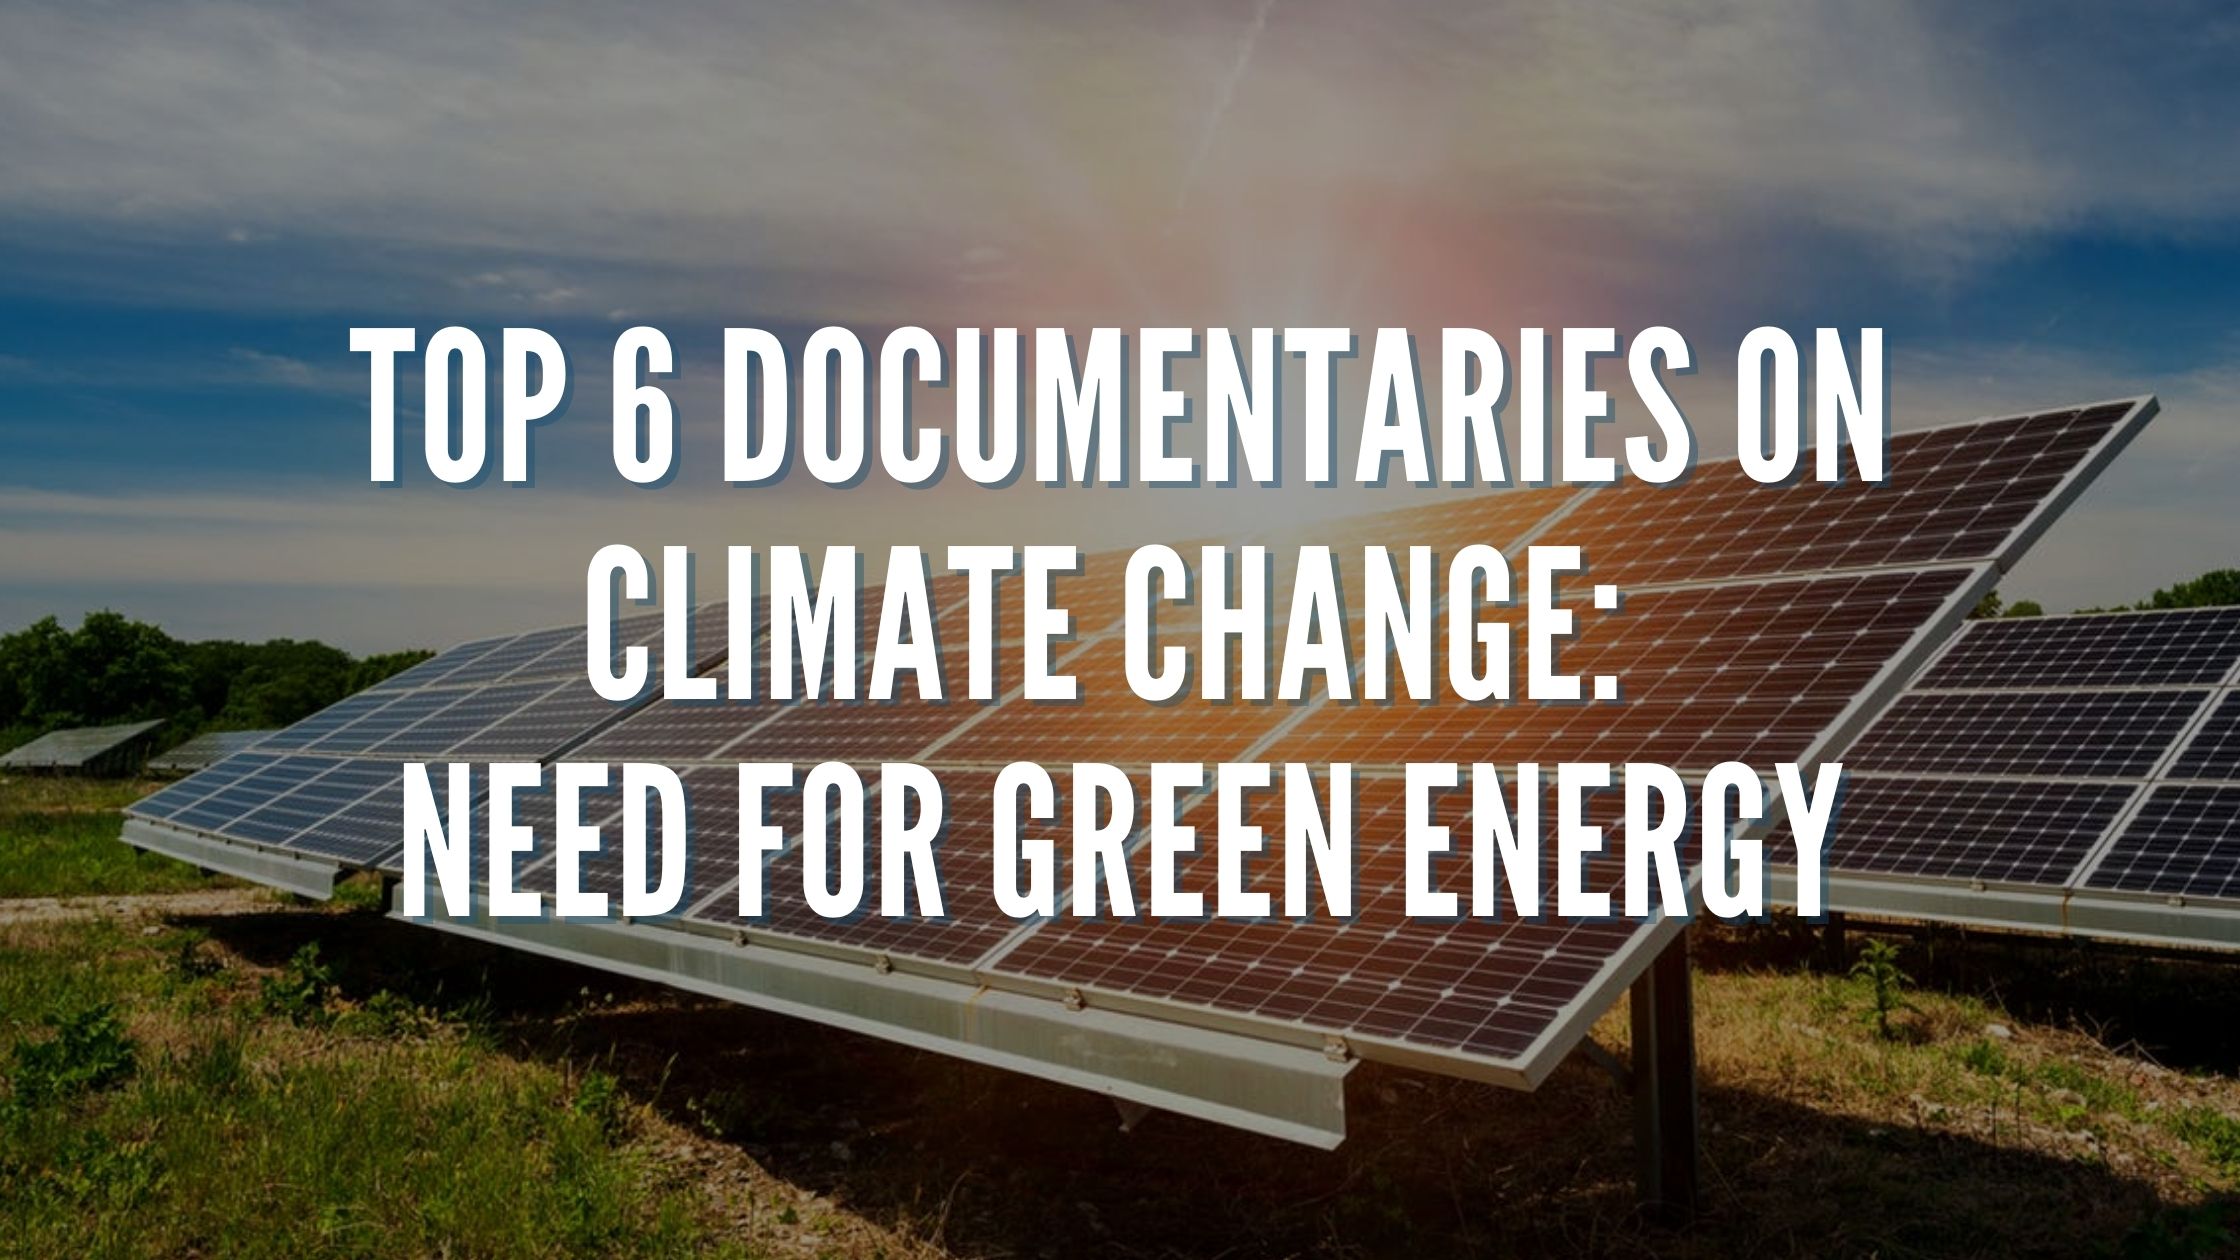 Top 6 Documentaries on Climate Change Need for Green Energy